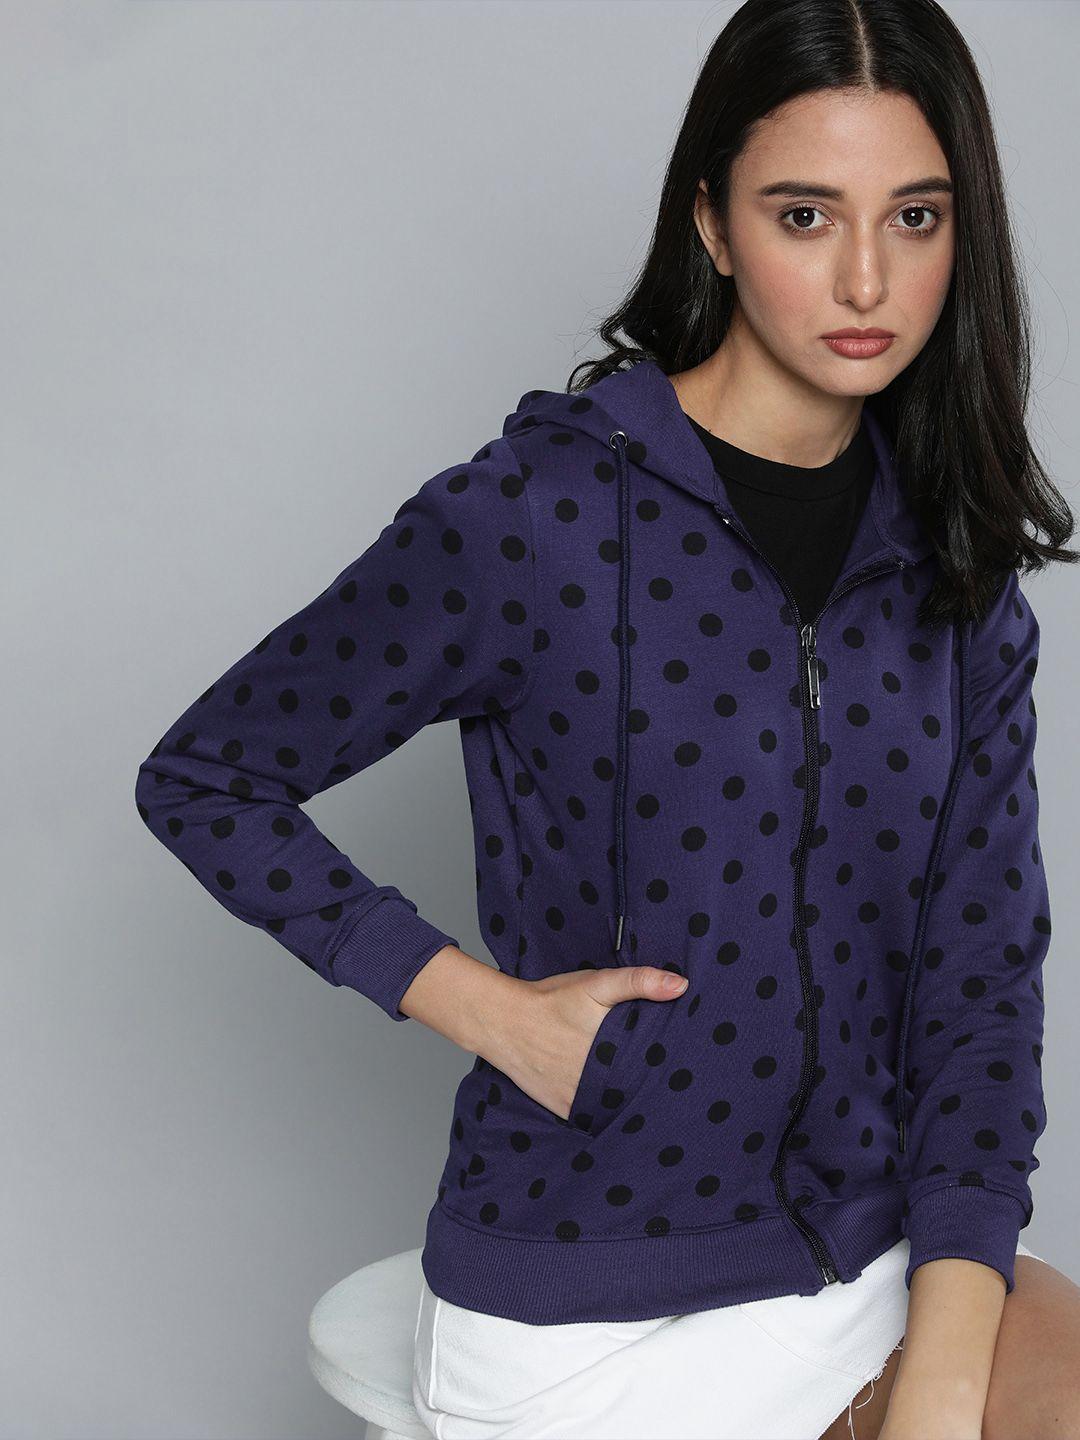 ether women blue and black polka dot printed front-open hooded sweatshirt